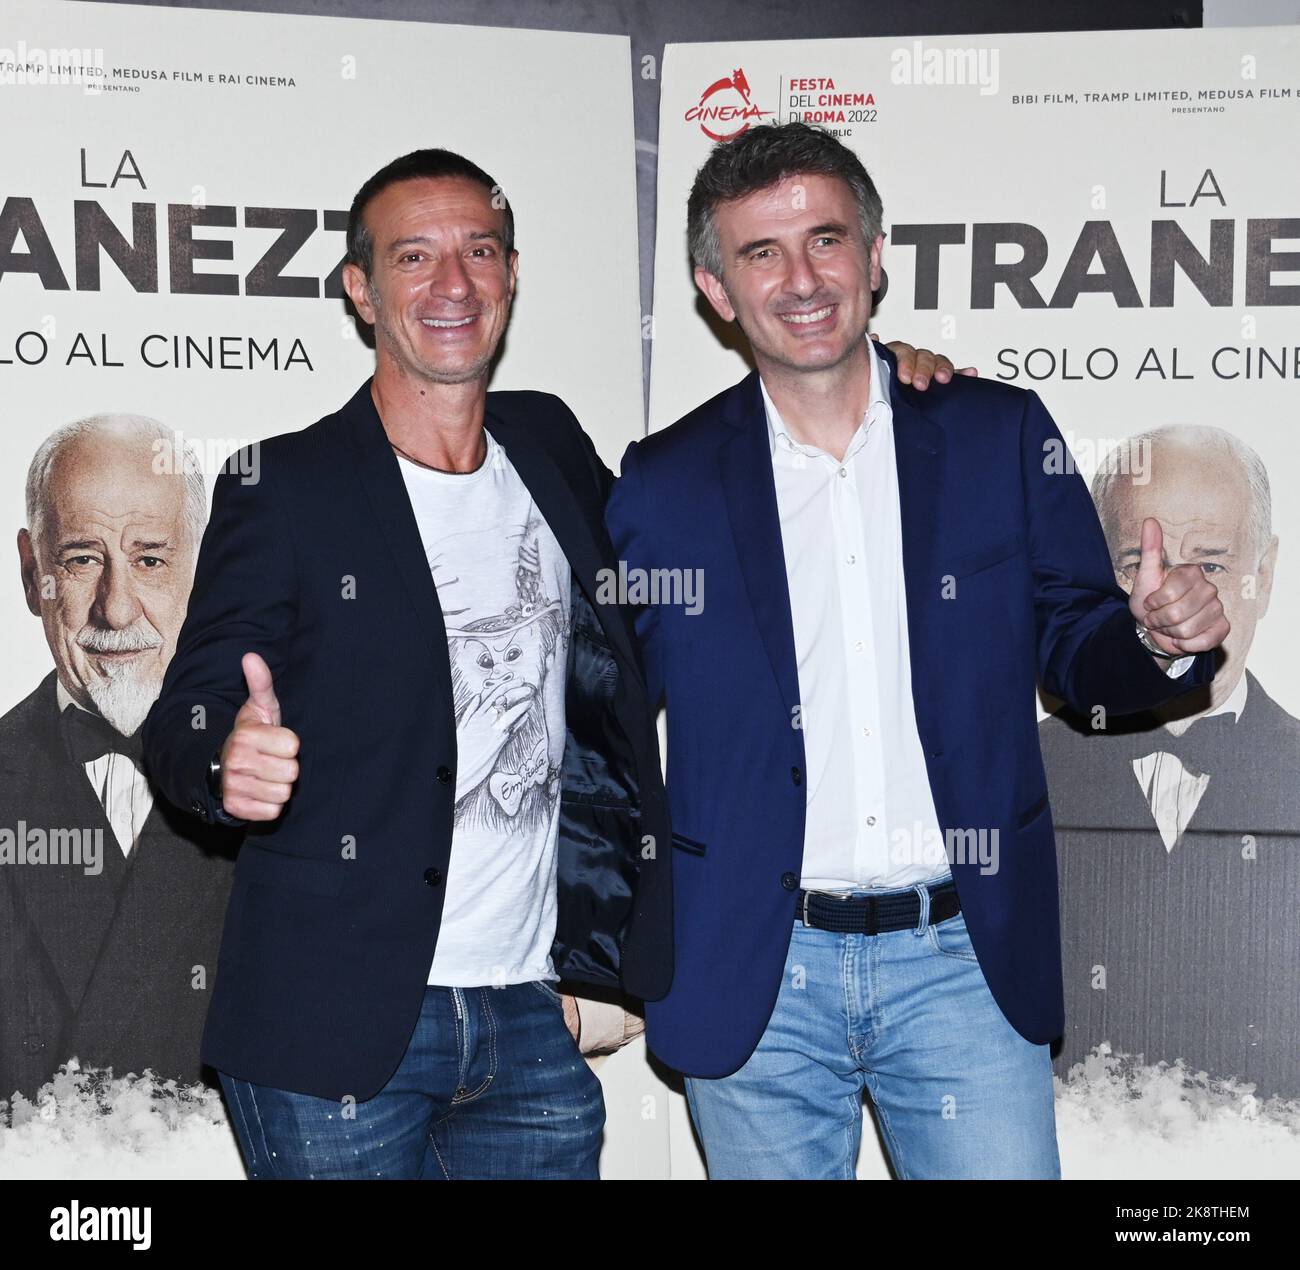 Milan, Italy. 24th Oct, 2022. Milan, Italy The strangeness feature by Roberto Andò, premiered at the Rome Film Festival with leading actors Toni Servillo, Ficarra and Picone In the picture: Ficarra and Picone Credit: Independent Photo Agency/Alamy Live News Stock Photo